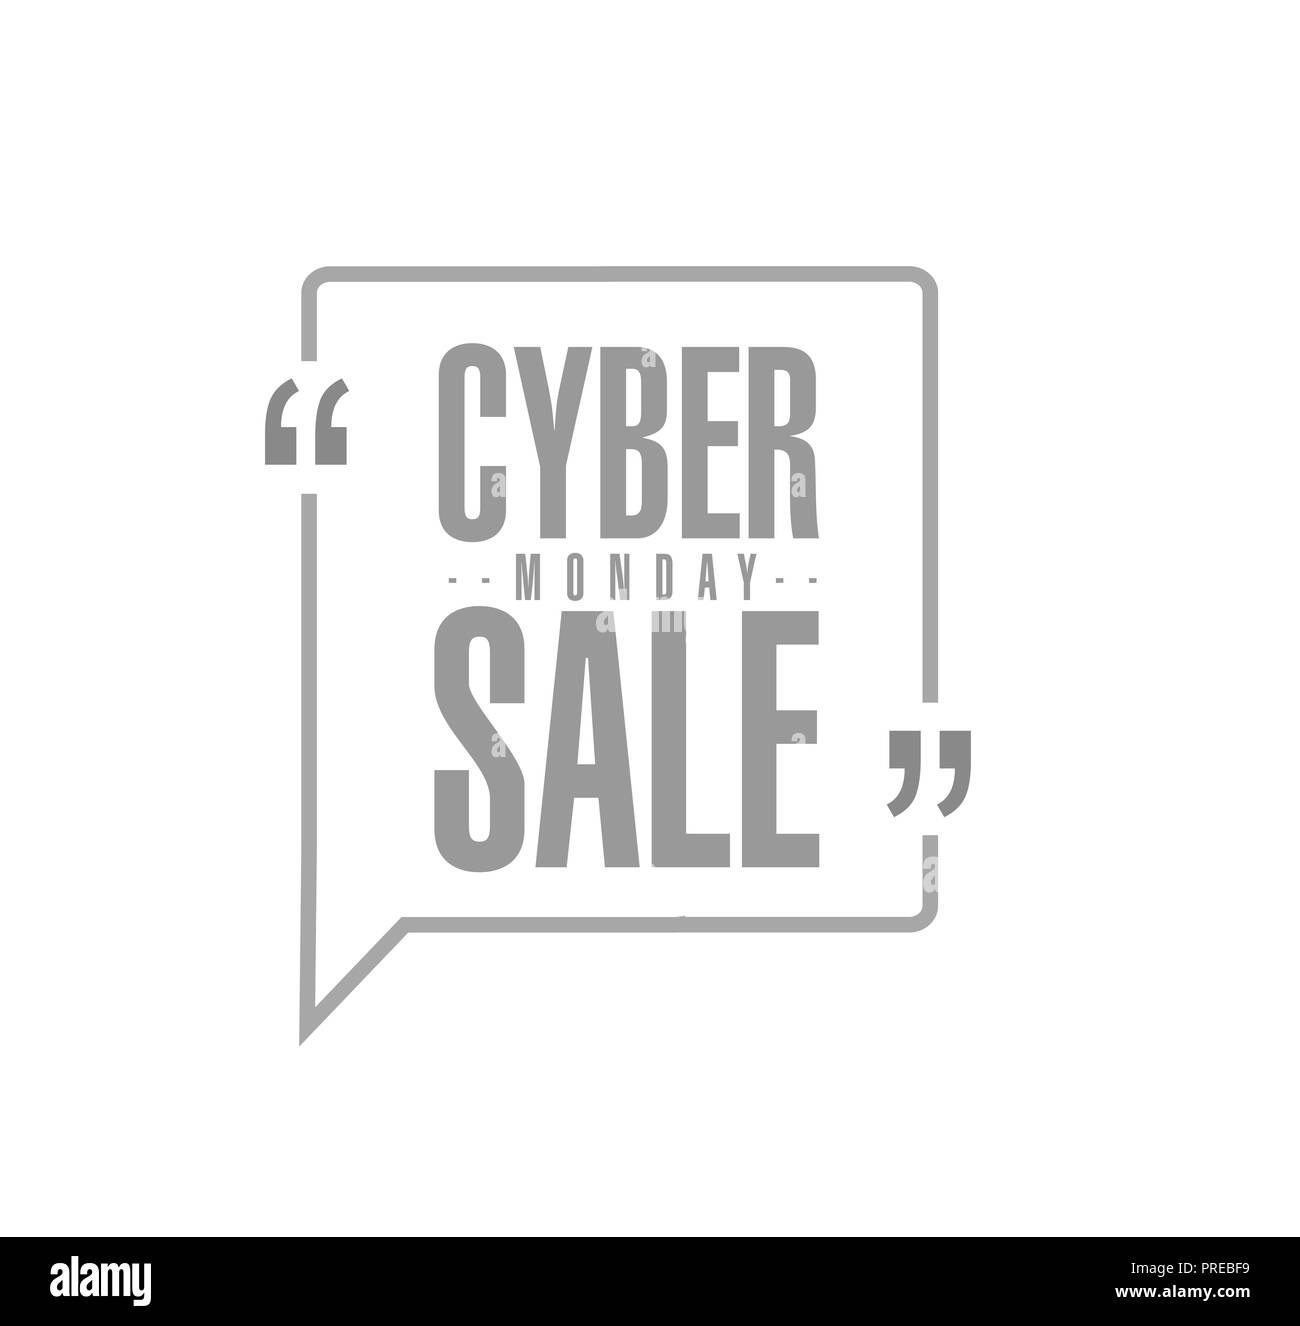 Cyber Monday Sale line quote message concept isolated over a white background Stock Photo